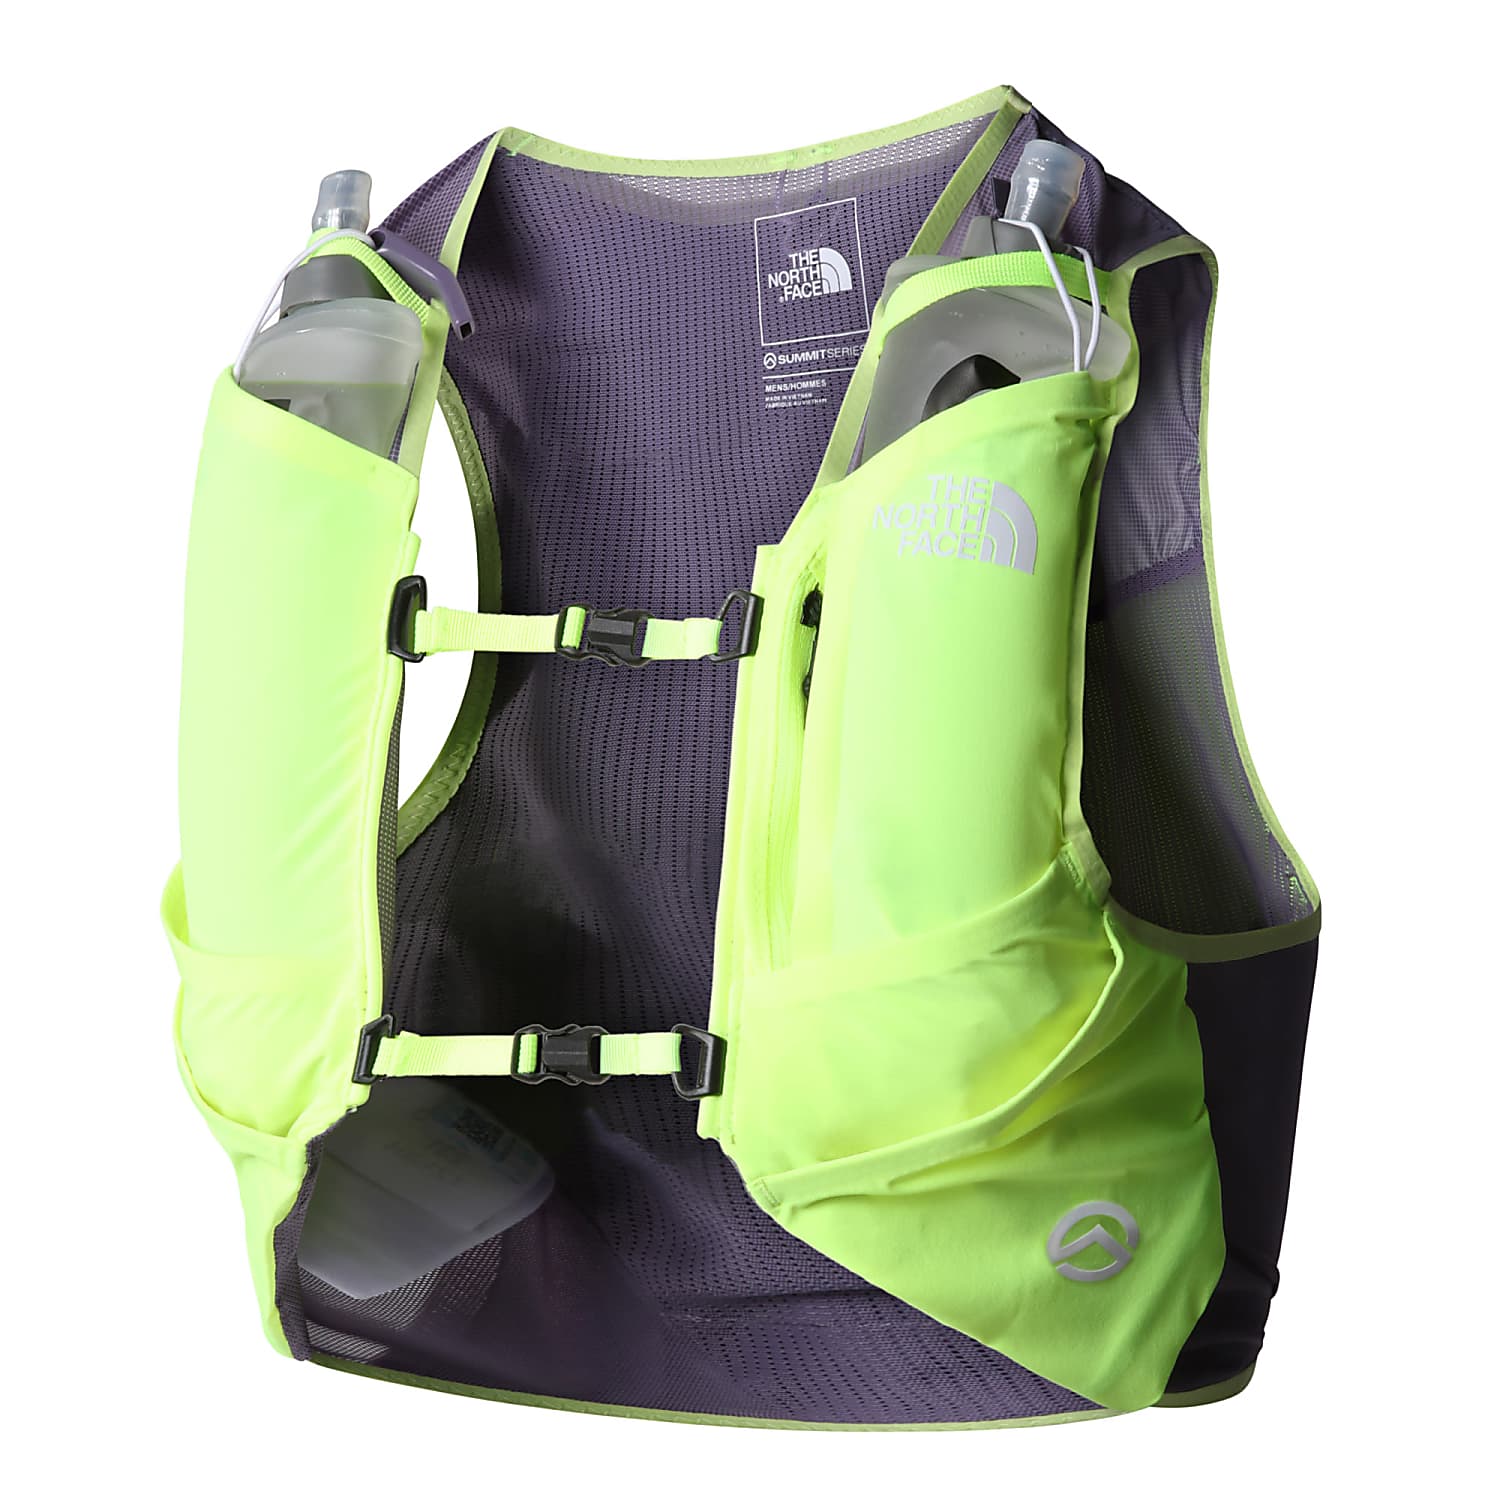 The North Face SUMMIT RUN RACE DAY VEST 8, Lunar Slate - LED Yellow